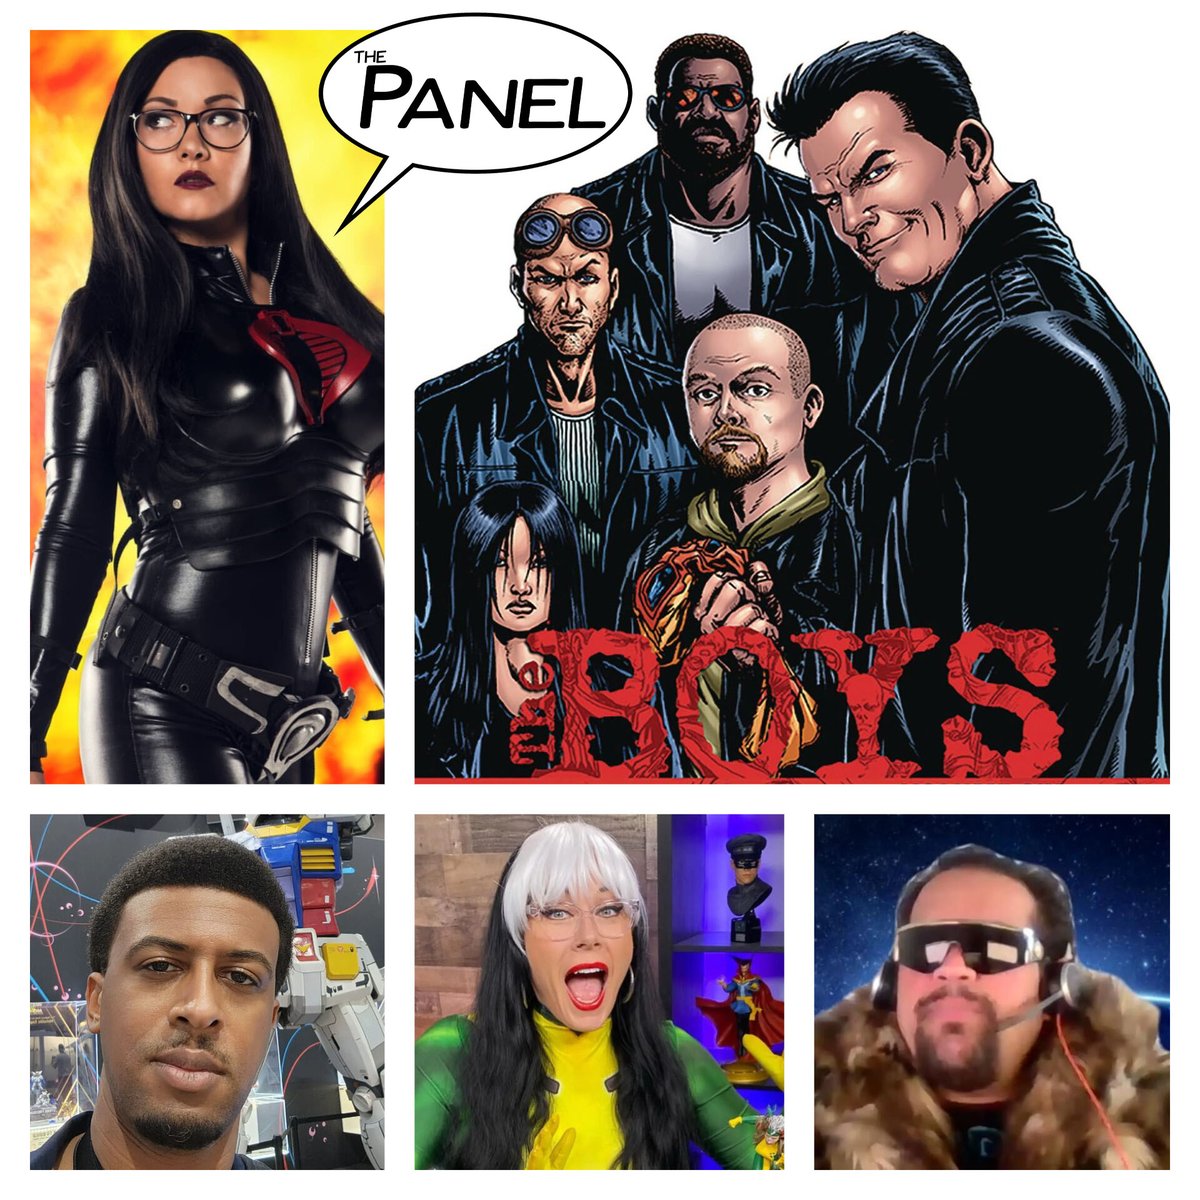 FRIDAY! Join @AniMiaOfficial @CannonDollX @3BlackGeeks's Chris Powell, and @ACTIONAGOGO for a very emotional episode of THE PANEL... We're going to read @DynamiteComics's THE BOYS for the first time! Hold on to your butts! 3pm ET on YouTube:: youtube.com/watch?v=Jw-aAr…